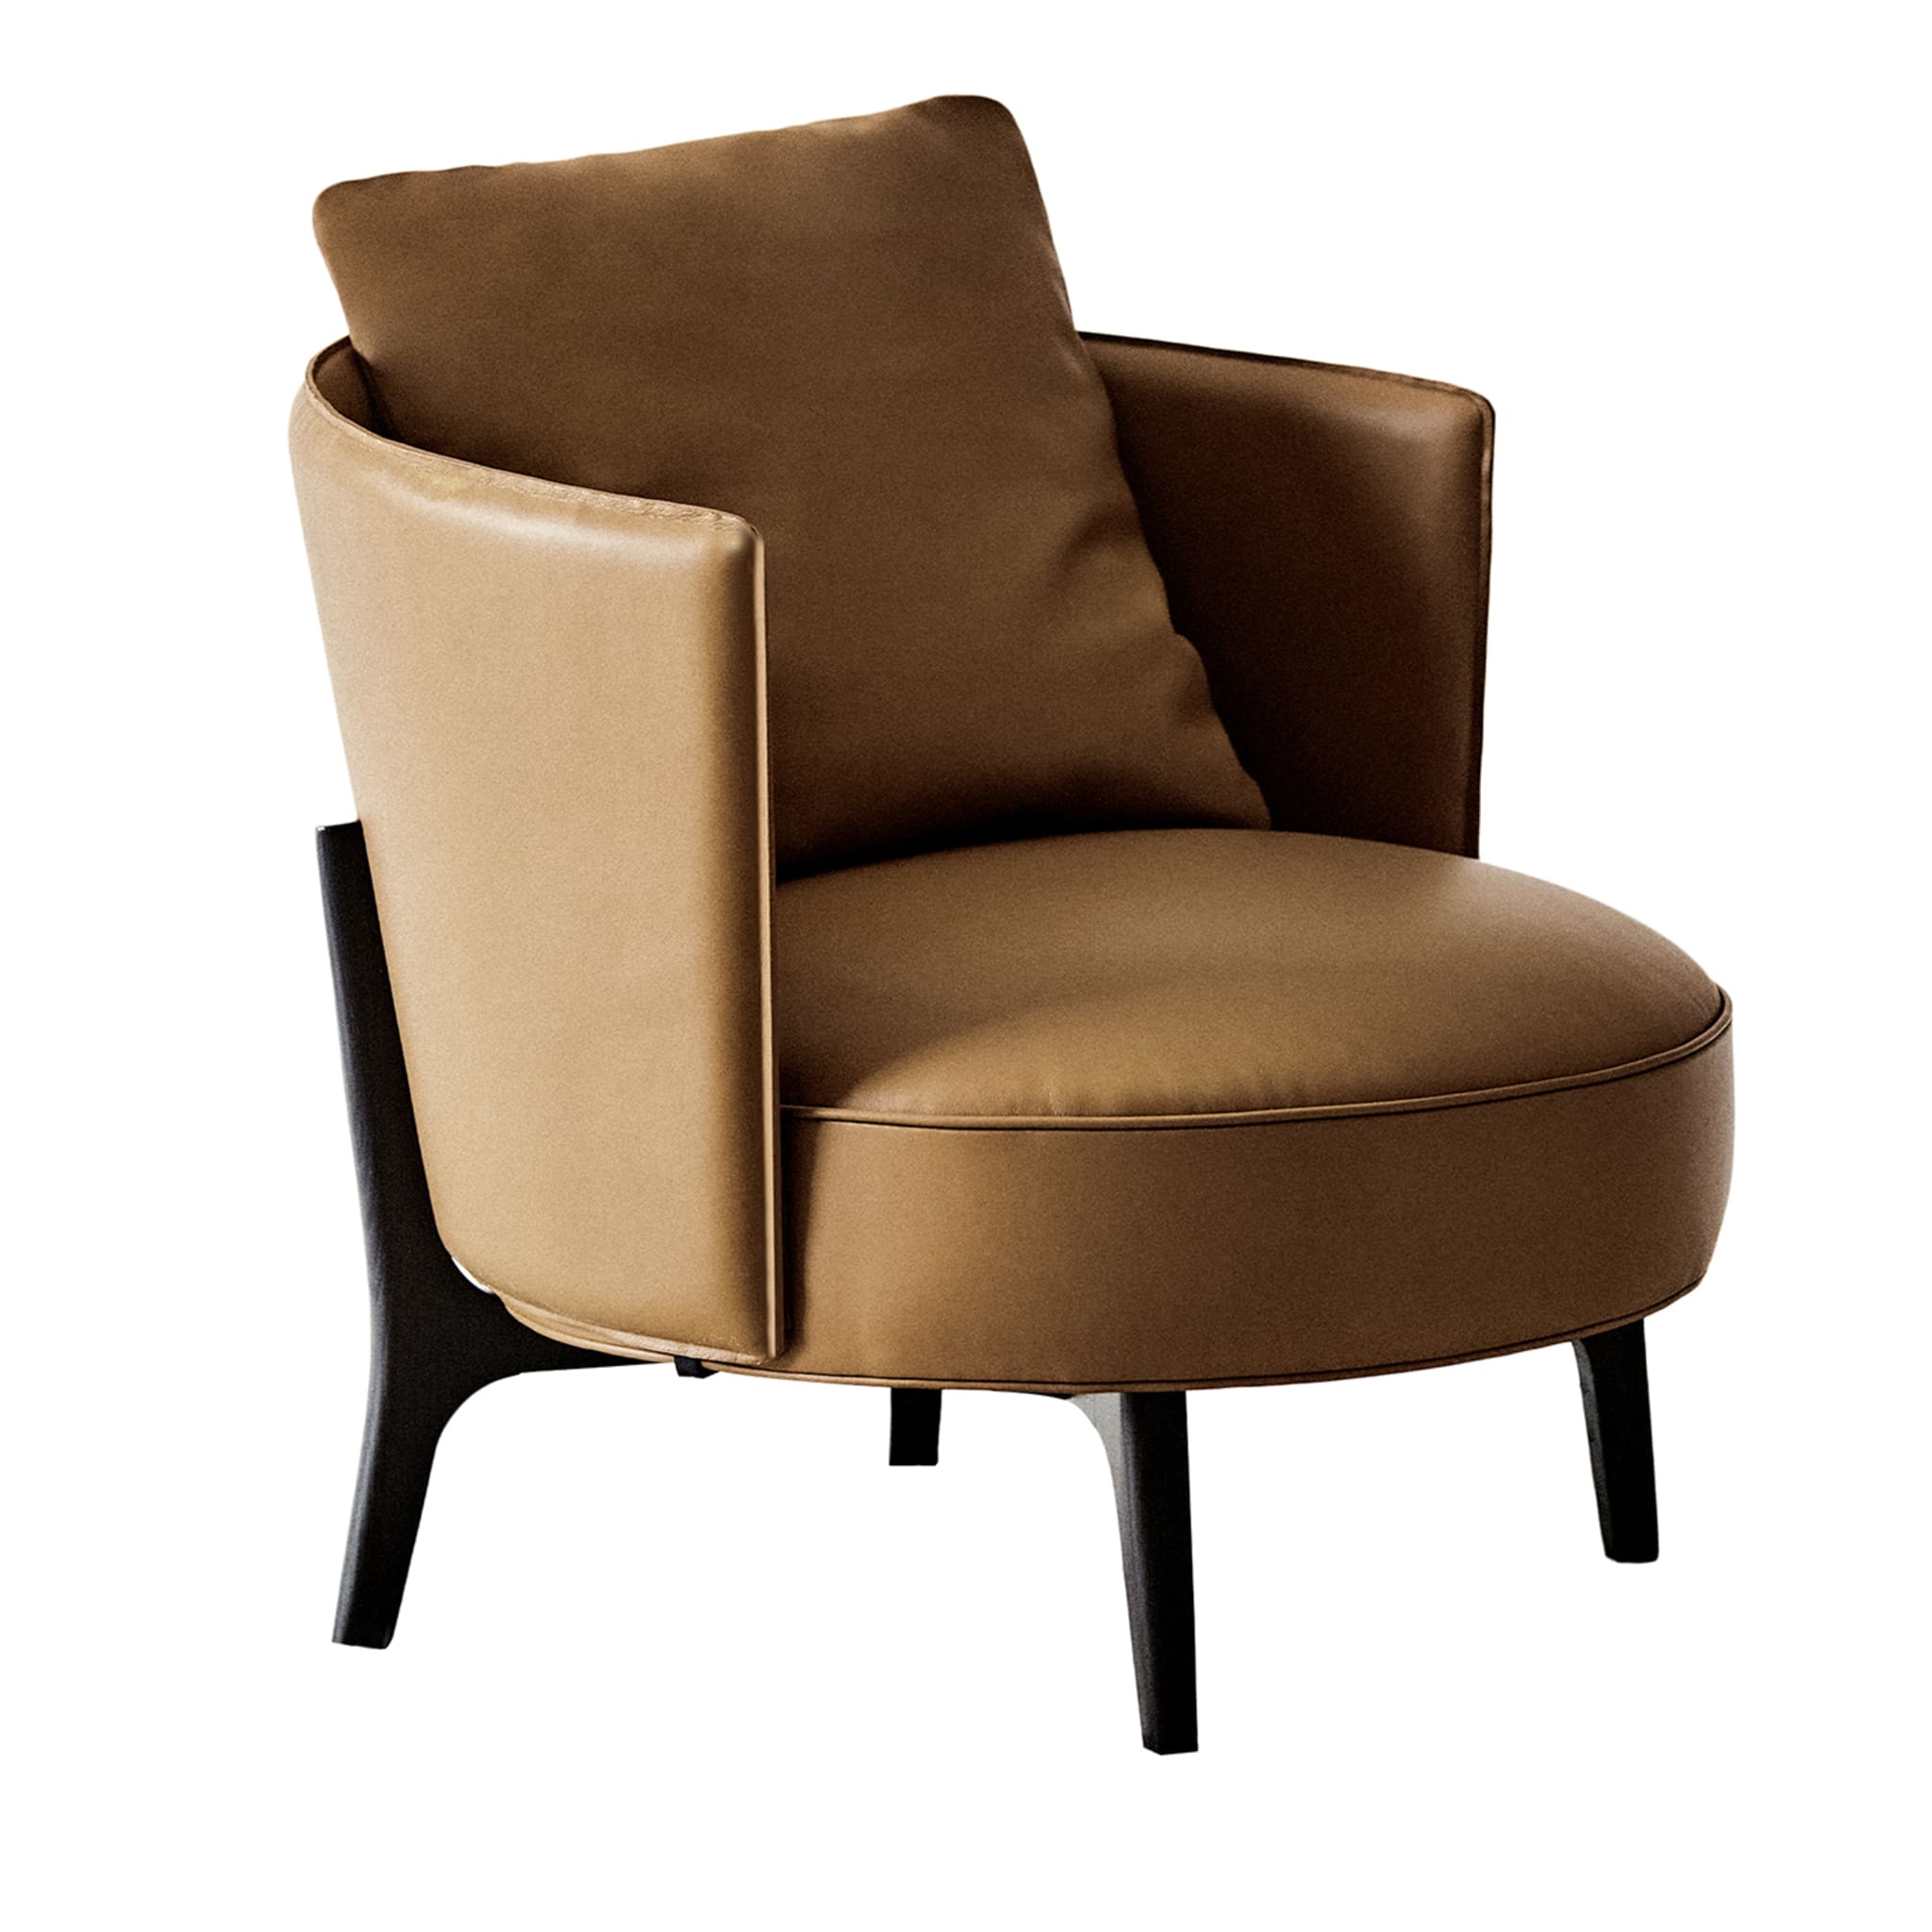 Ares 104 Brown & Black Armchair by Ludovica + Roberto Palomba - Main view